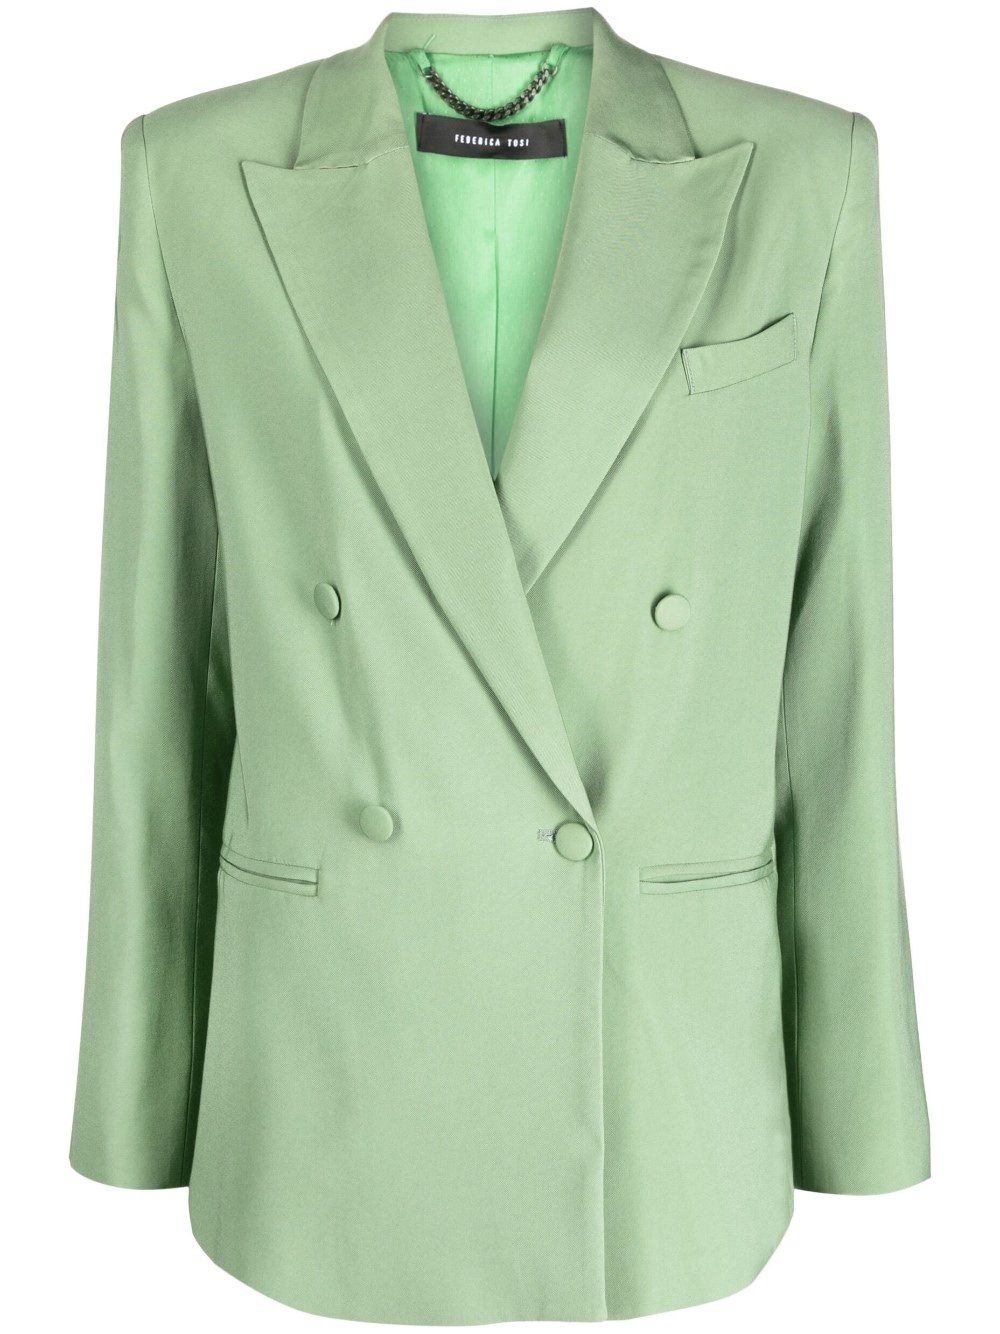 FEDERICA TOSI DOUBLE-BREASTED BLAZER WITH PEAK LAPELS